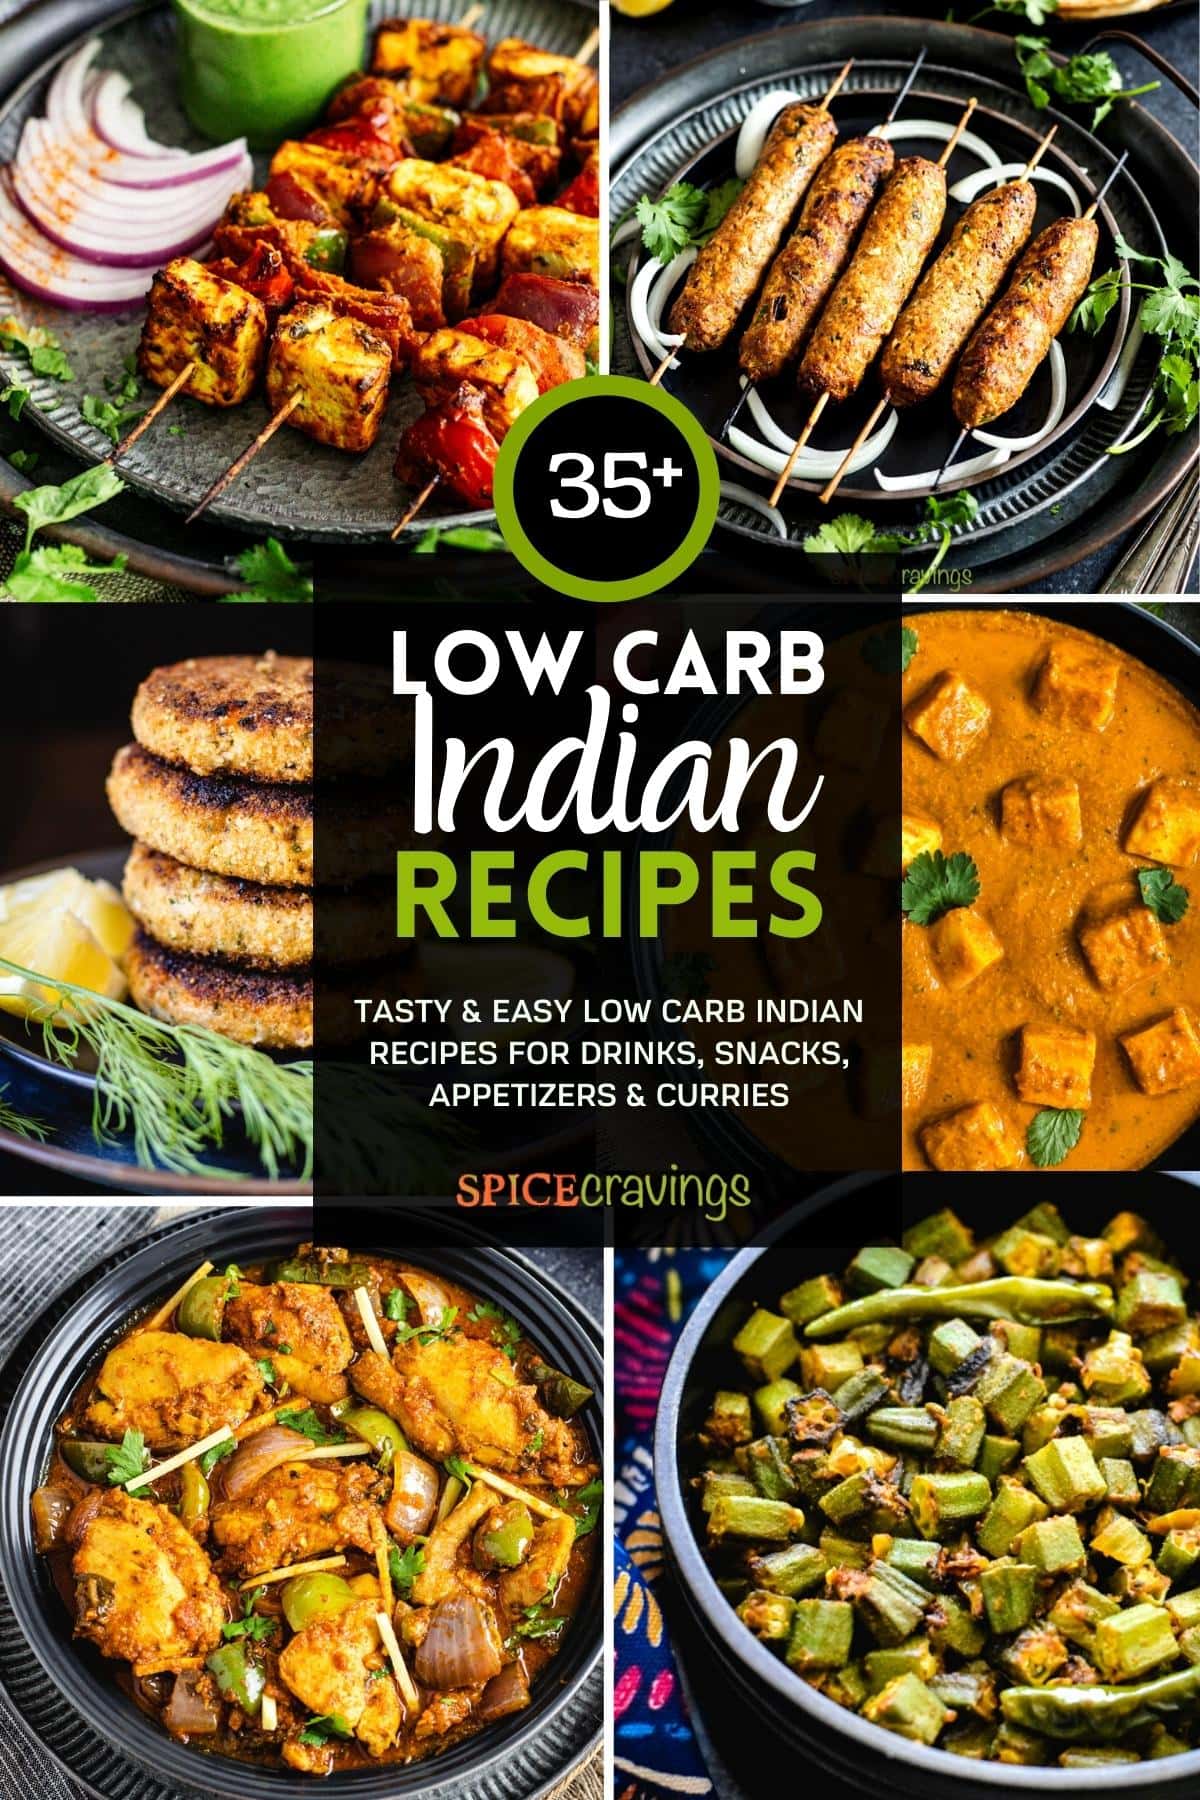 6-image grid showing low carb indian food including paneer, kebab, patties and curry